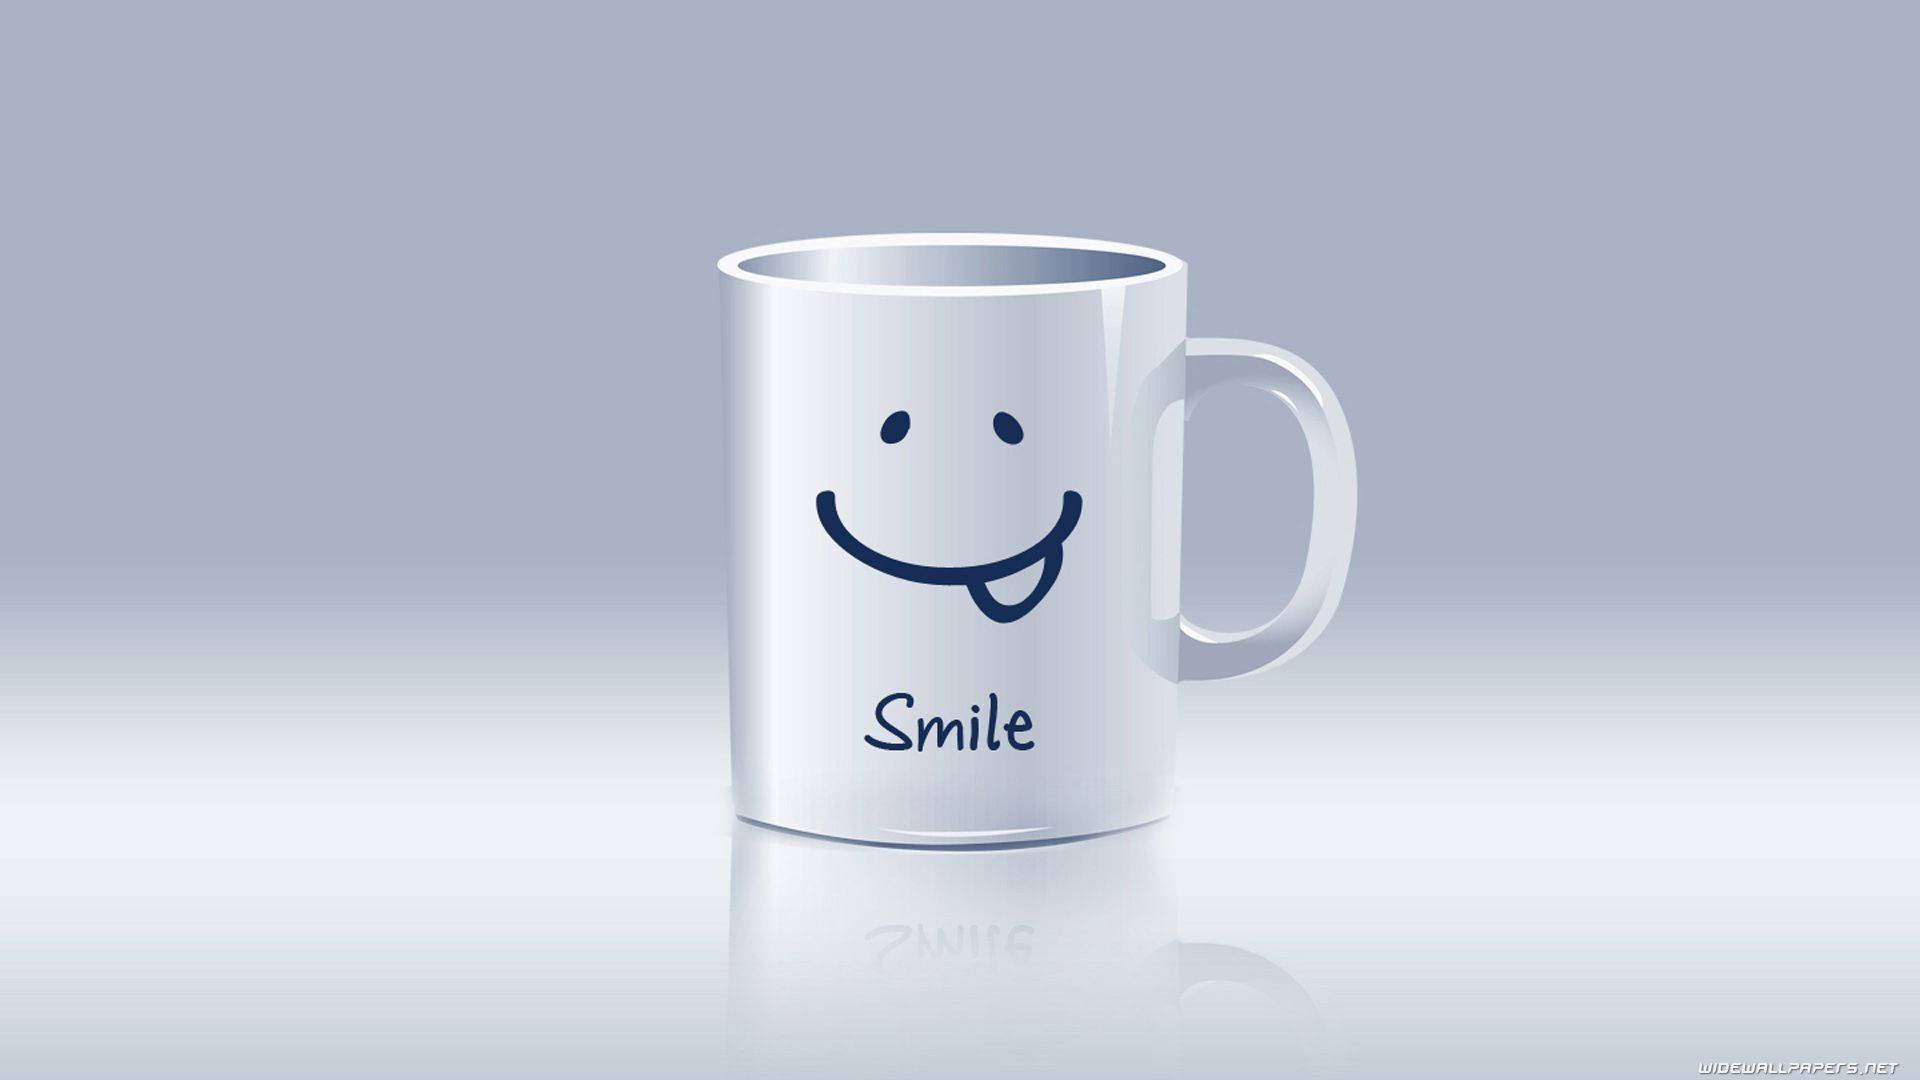 Can't Help But Smile With A Warm Mug Of Coffee Background